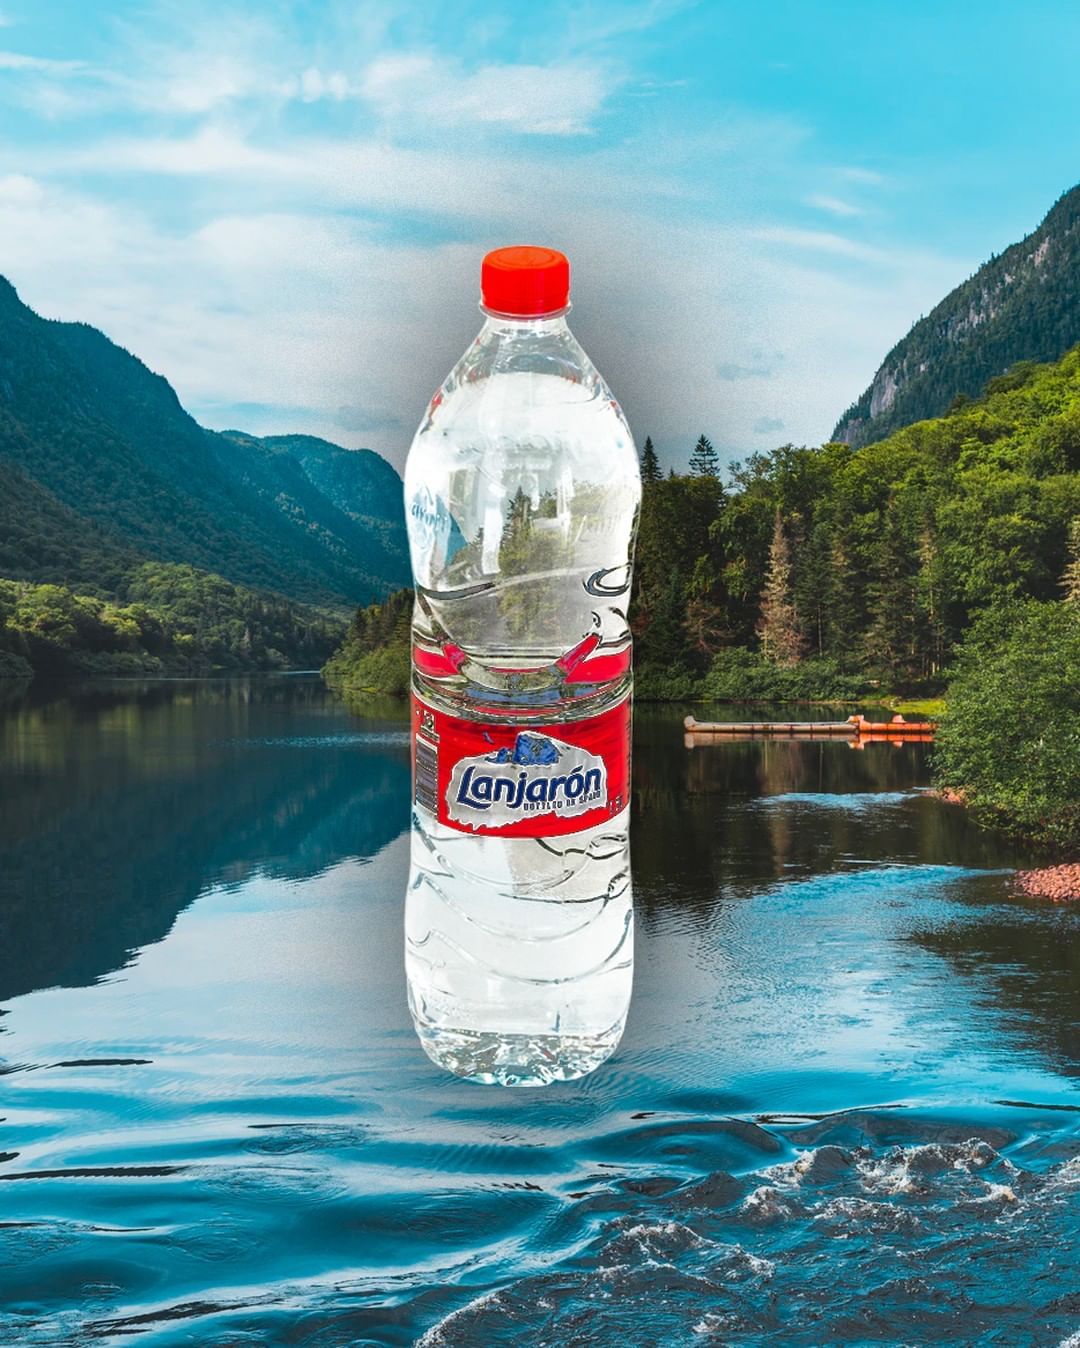 #Lanjaron Natural Mineral Water.⁠ ⁠ Mineral water is bottled at the source. Mineral water includes calcium, magnesium, potassium, sodium, iron, zinc.⁠ ⁠ What better way to give your body what it needs than through natural #mineralwater.